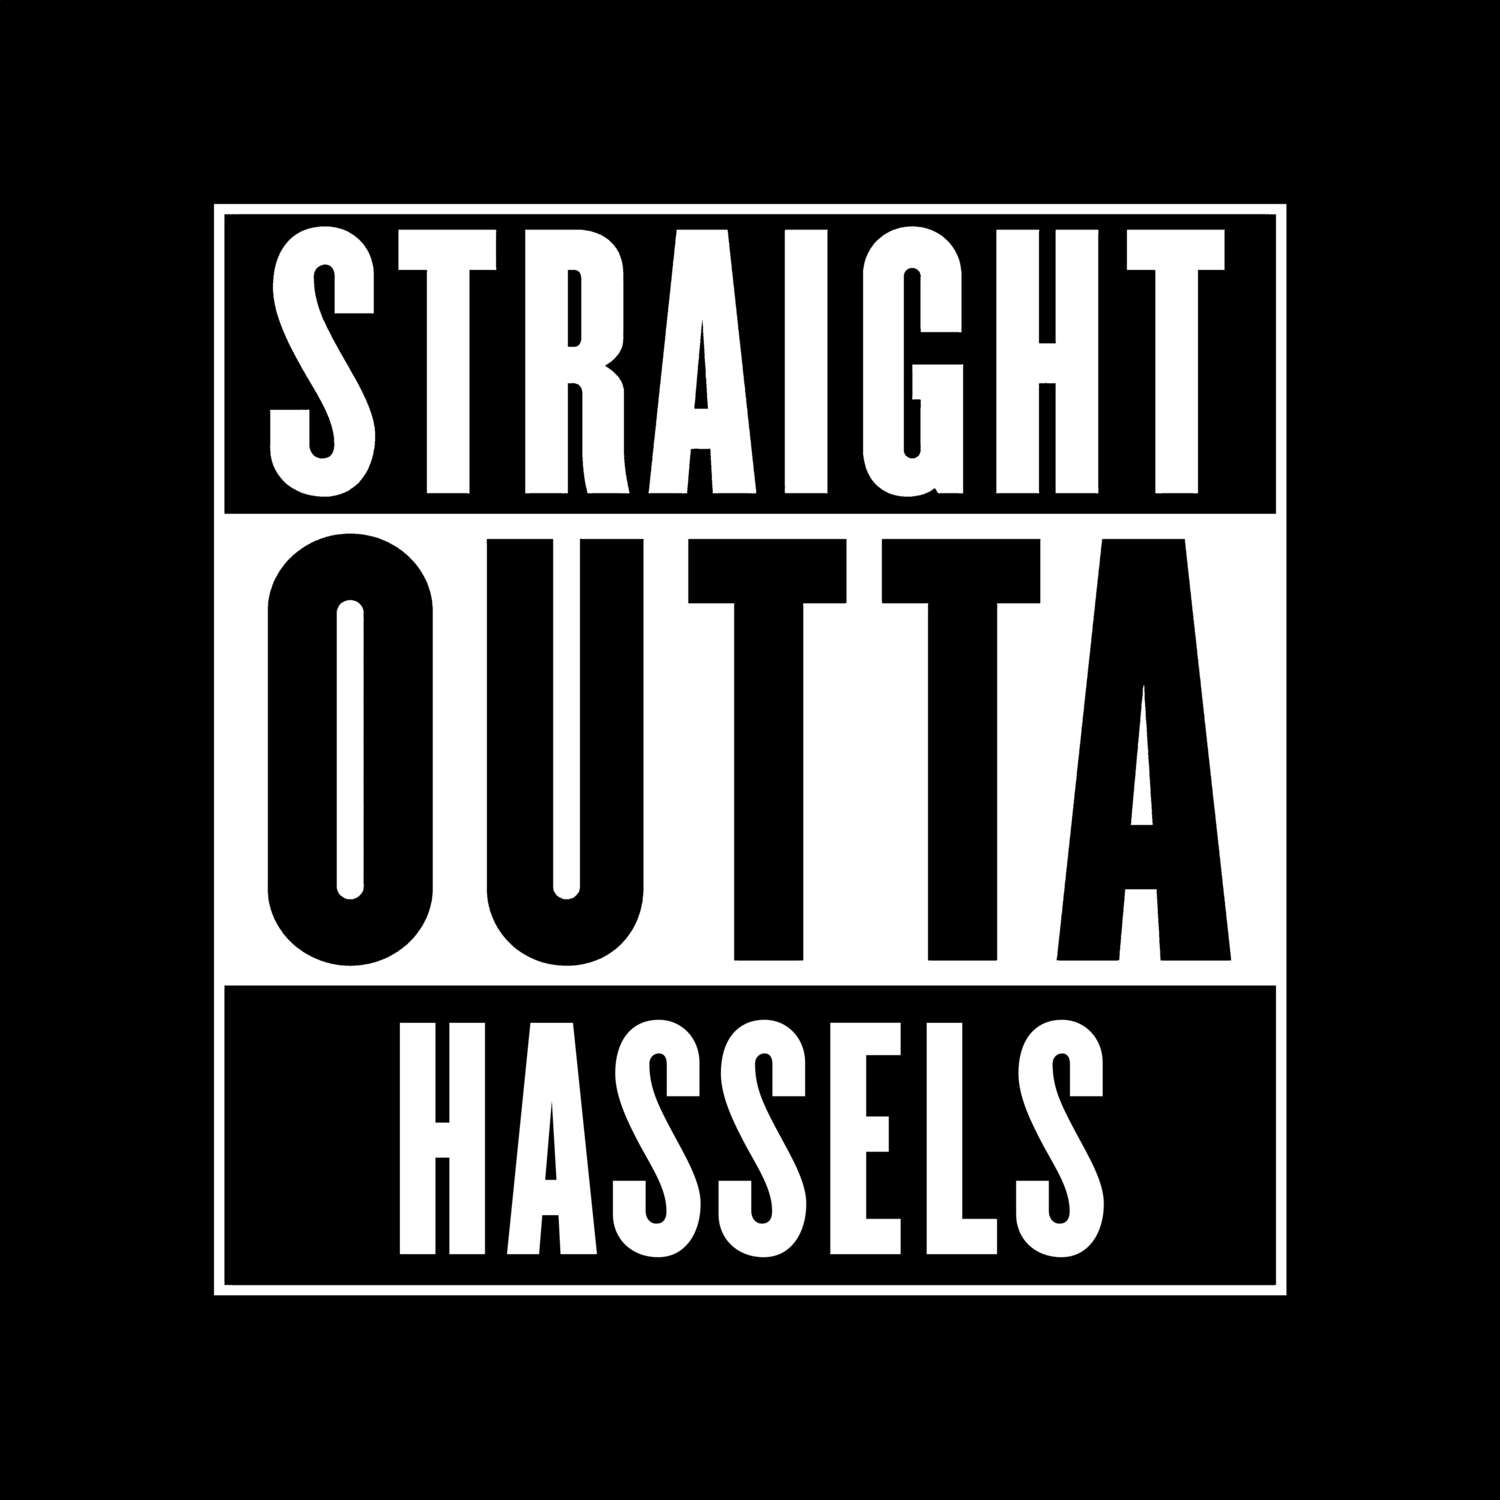 Hassels T-Shirt »Straight Outta«